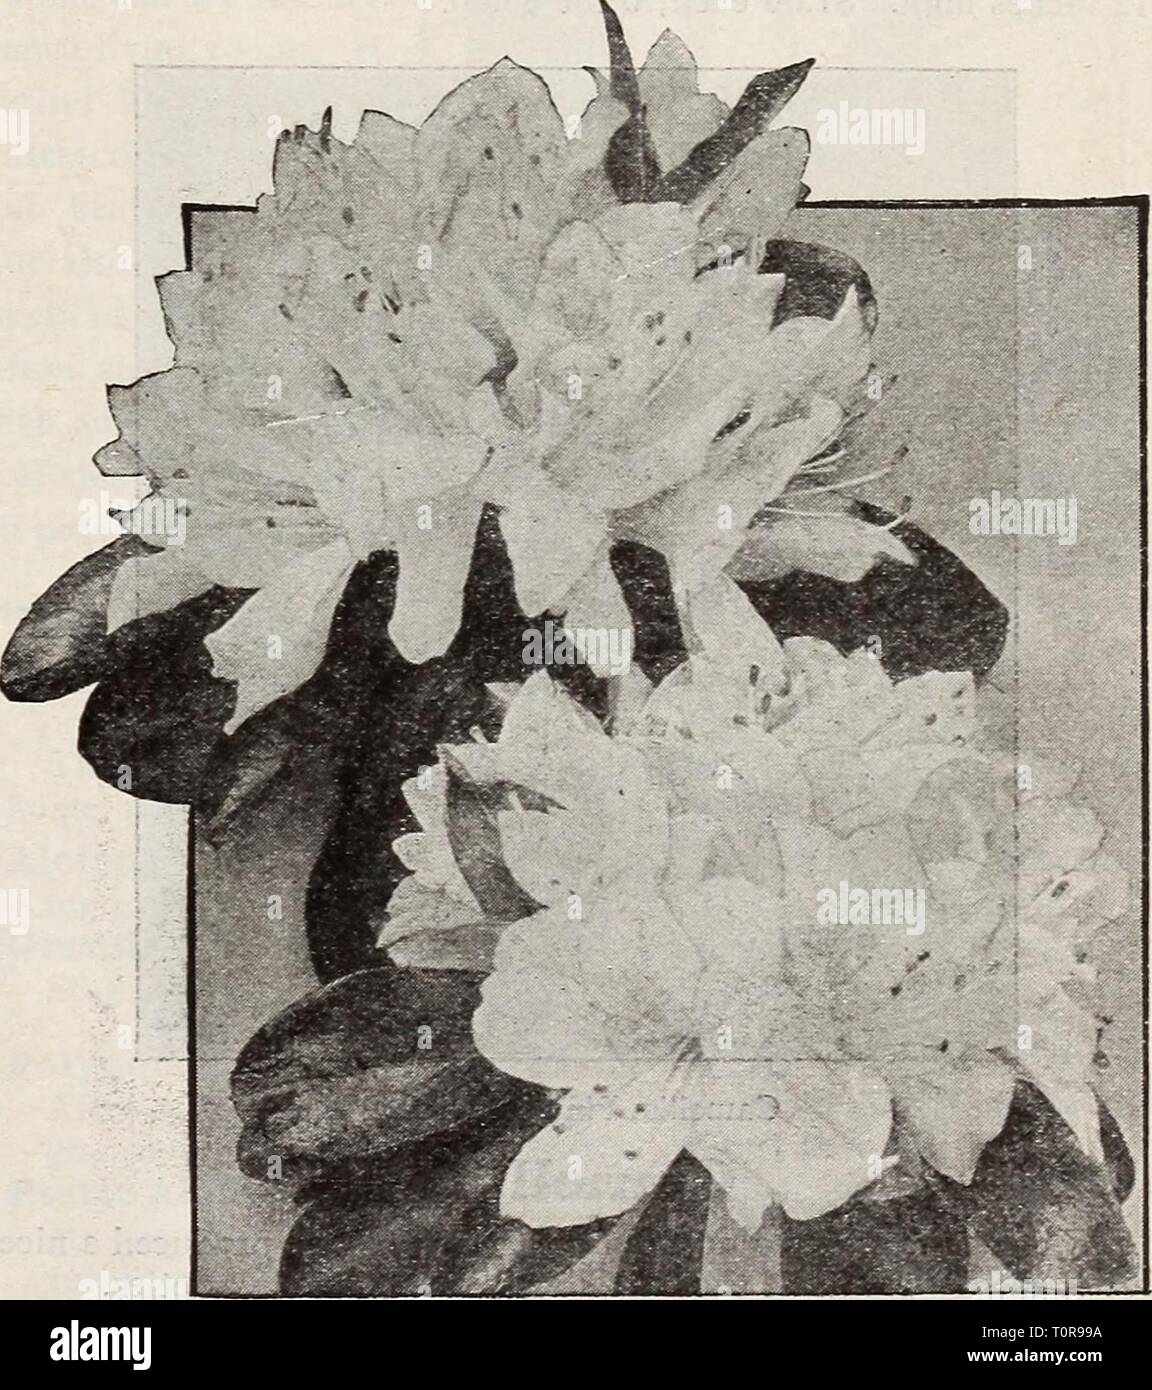 Dreer's bulbs plants, shrubs and Dreer's bulbs plants, shrubs and seeds for fall planting : autumn 1937  dreersbulbsplant1937henr Year: 1937  Agapanthus umbellatus Agapanthus Umbellatus (Blue Lily of the Nile). Bears clusters of bright blue flowers on flower stalks 3 feet long. Blooms for an excep- tionally long time. A most desirable plant for outdoor decora- tion, planted in large pots or tubs on the lawn or piazza. 6-inch pots $1.00; strong plants of flowering size, 8-inch tubs $3.00 each. Aglaonema Modestum (Chinese Evergreen). Showy rich green leaves. A choice house plant that may be grow Stock Photo